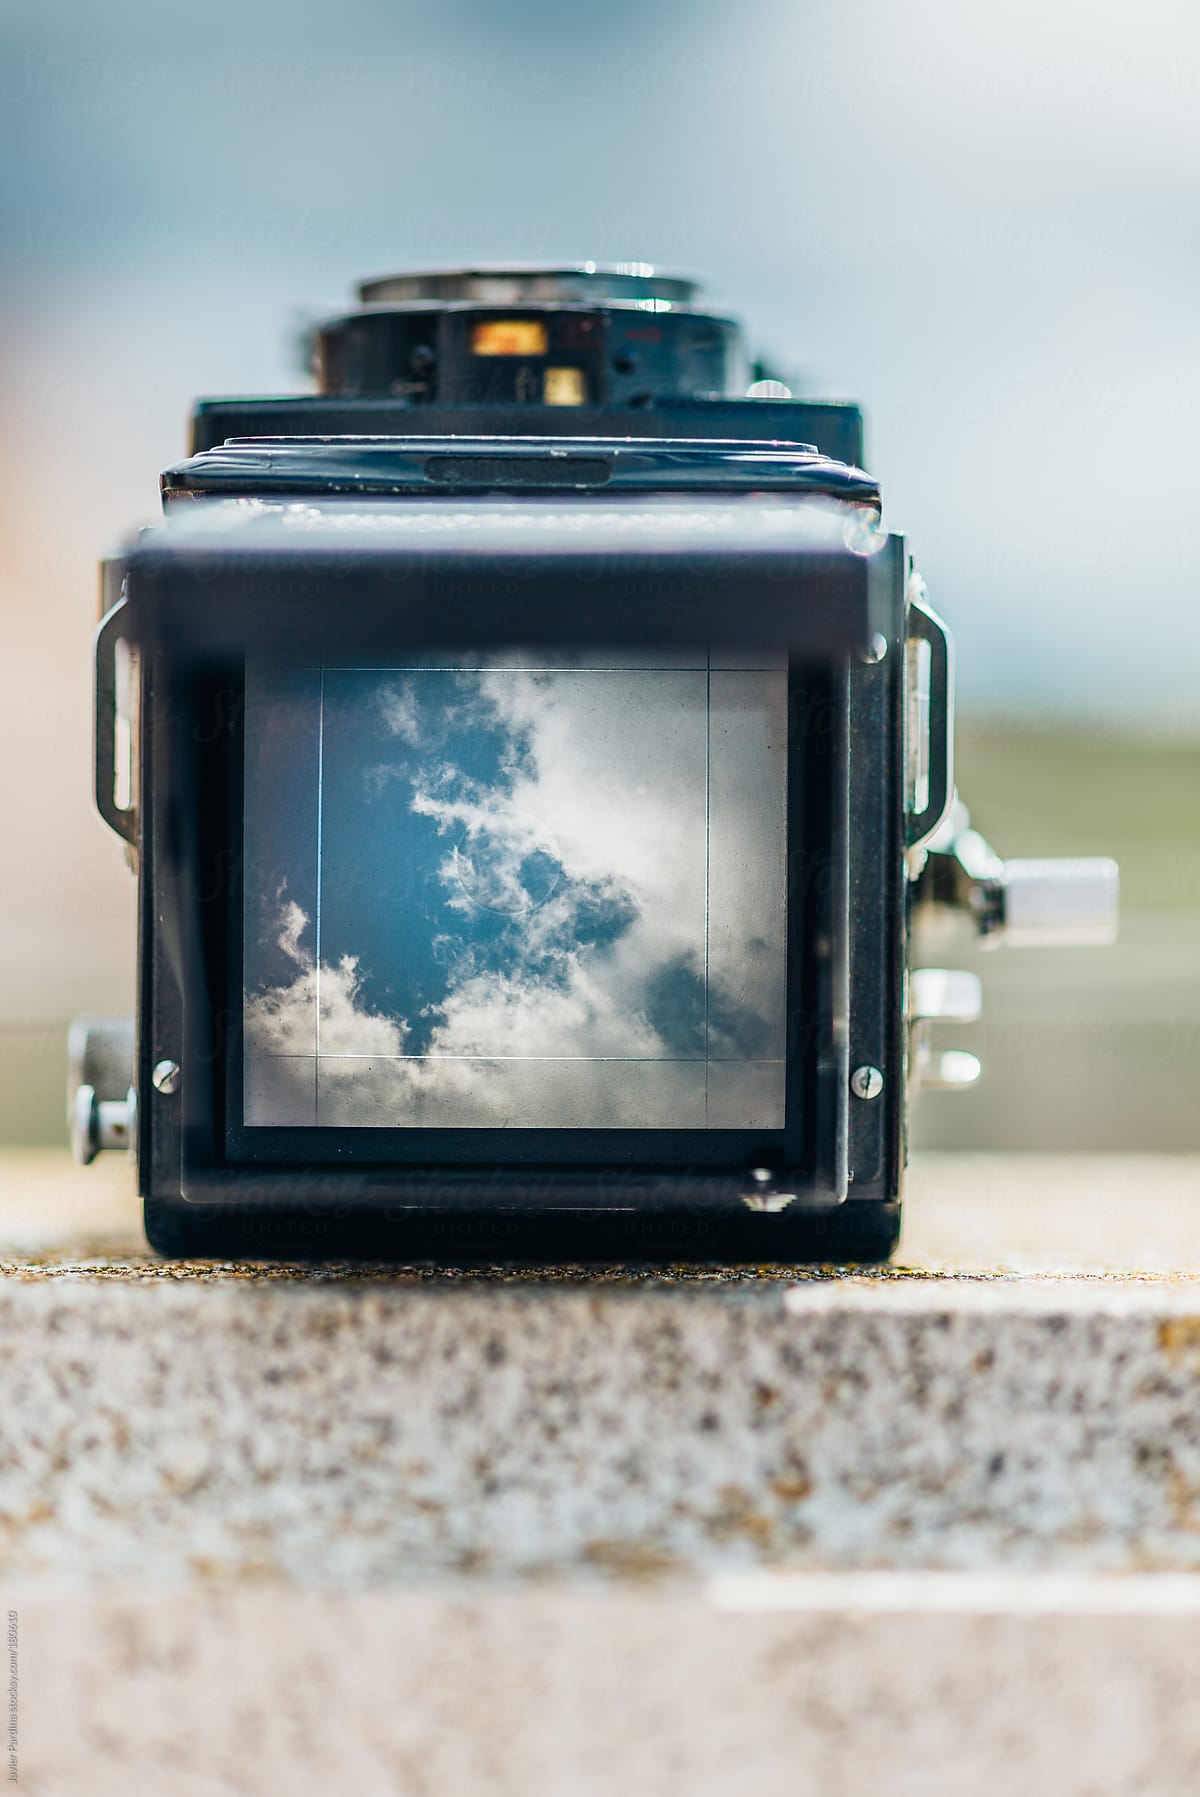 Retro camera focusing on clouds in the sky.